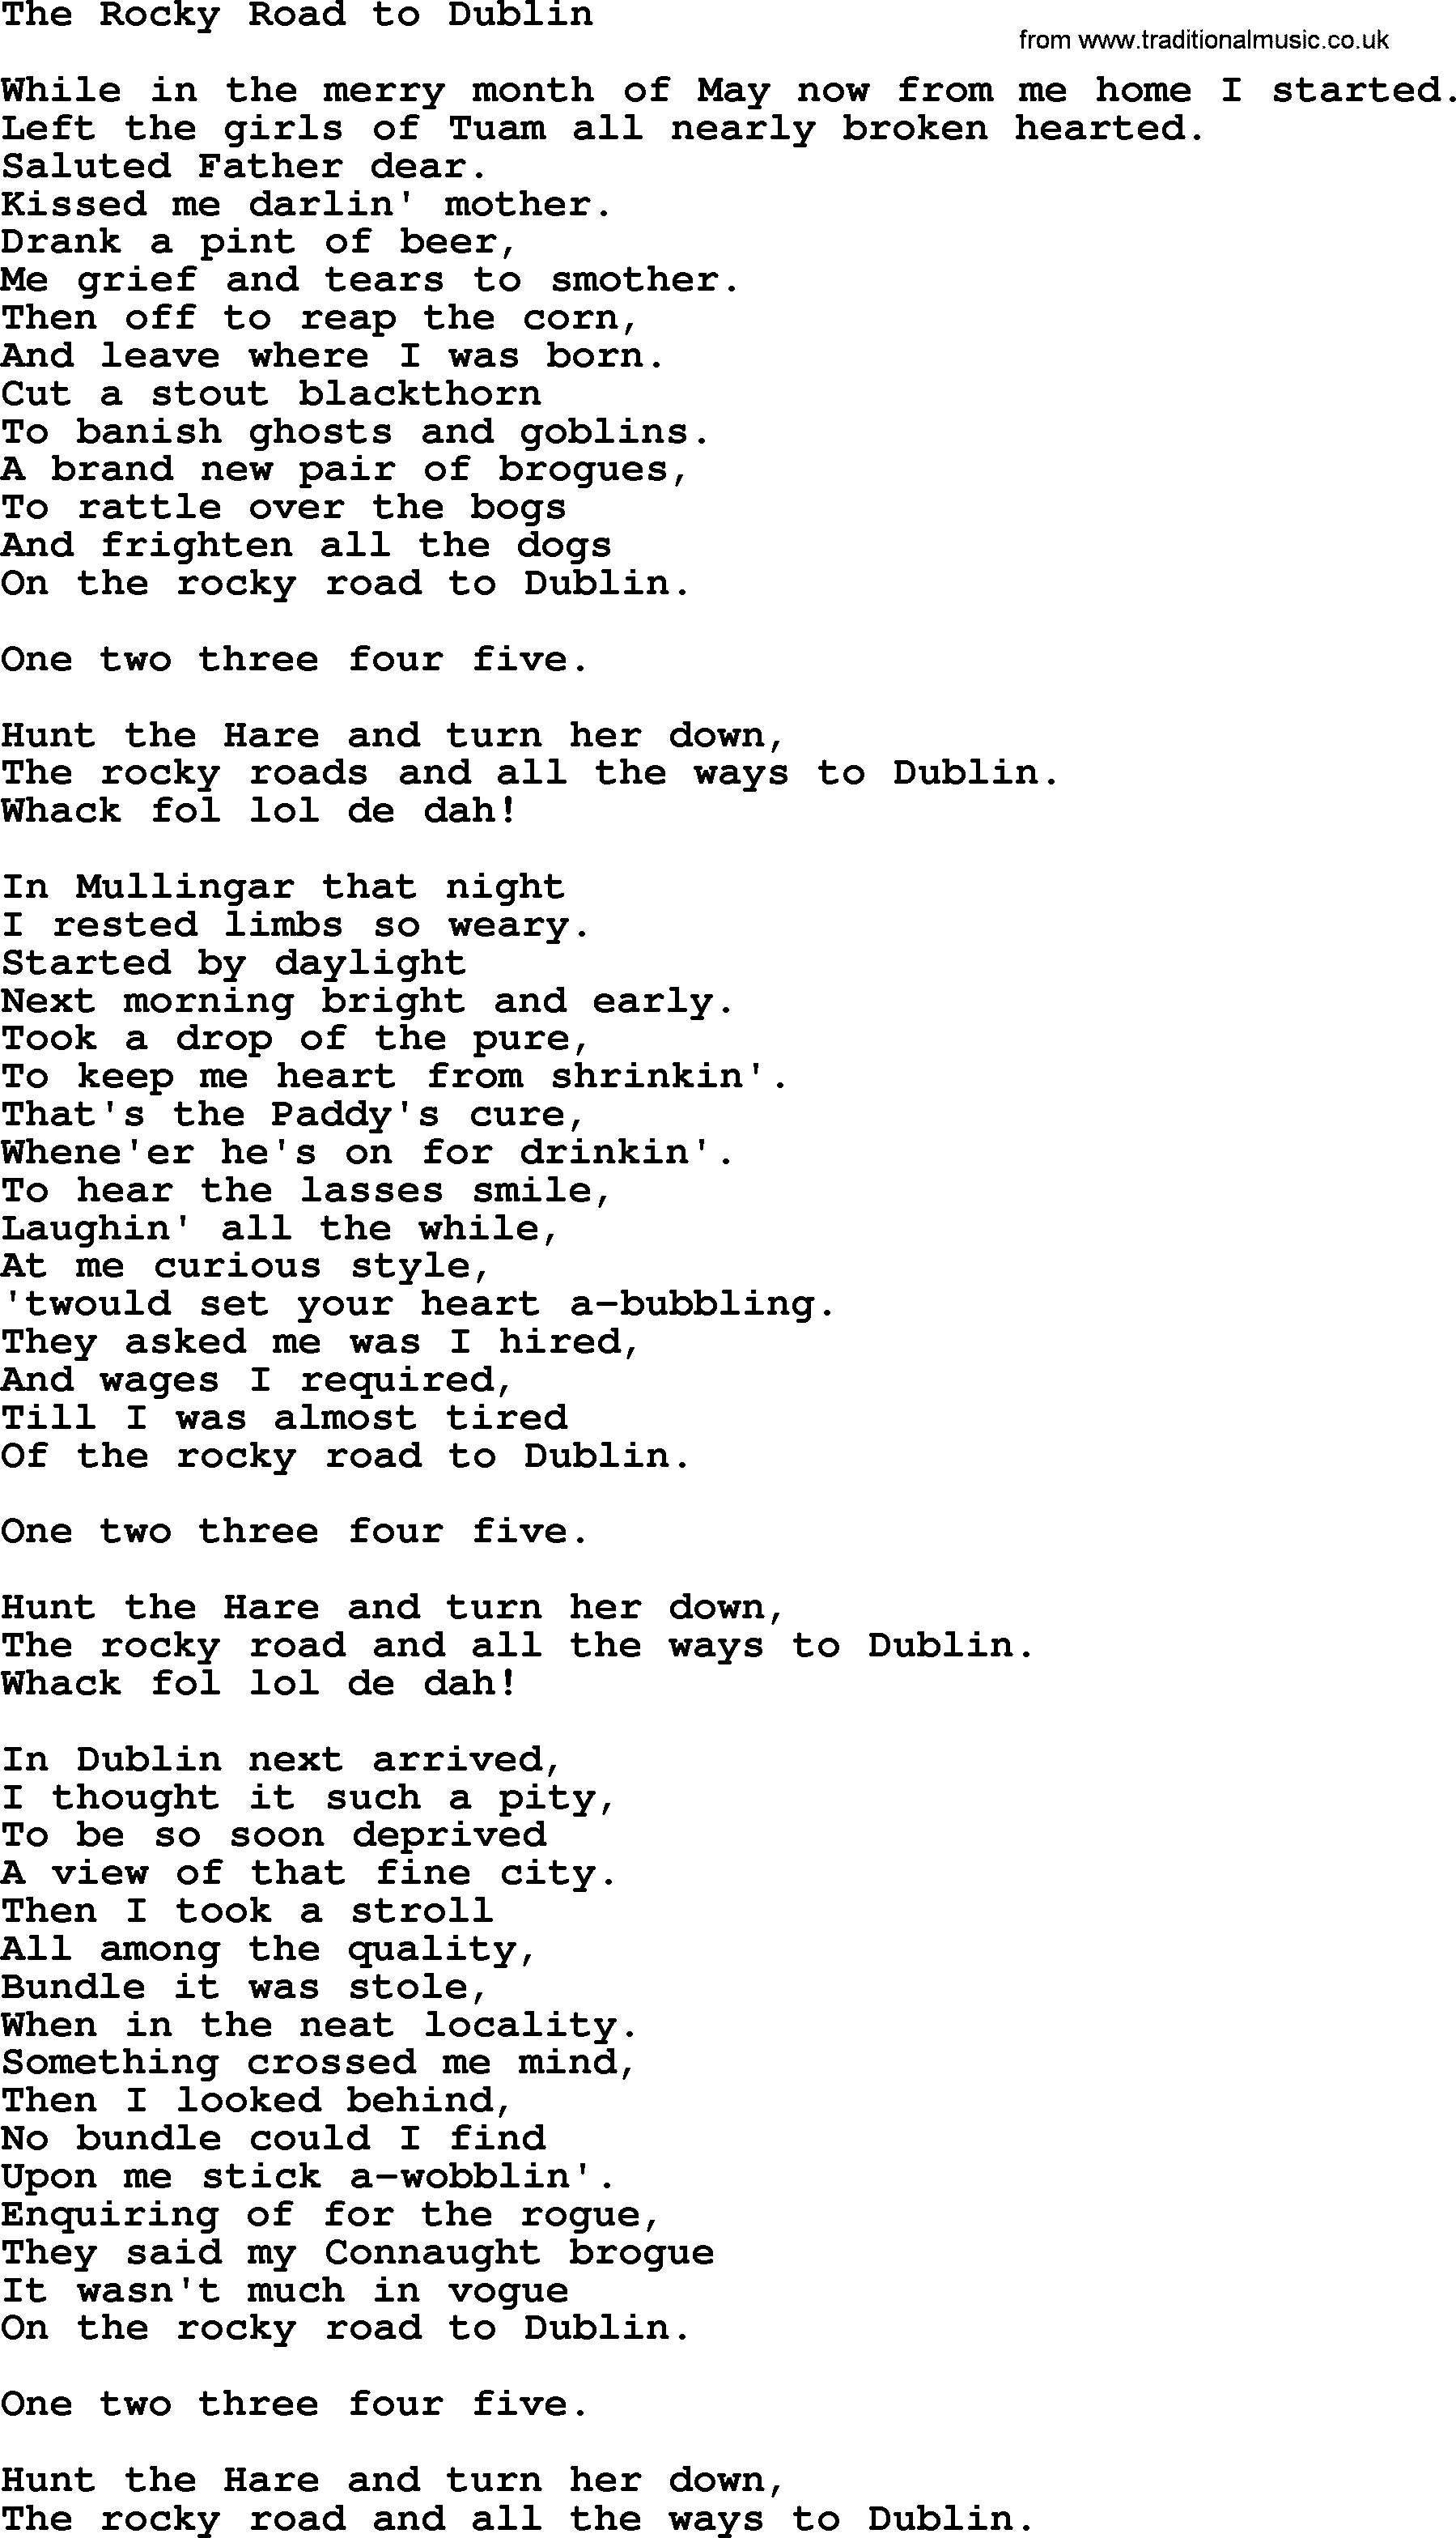 The Dubliners song: The Rocky Road To Dublin, lyrics